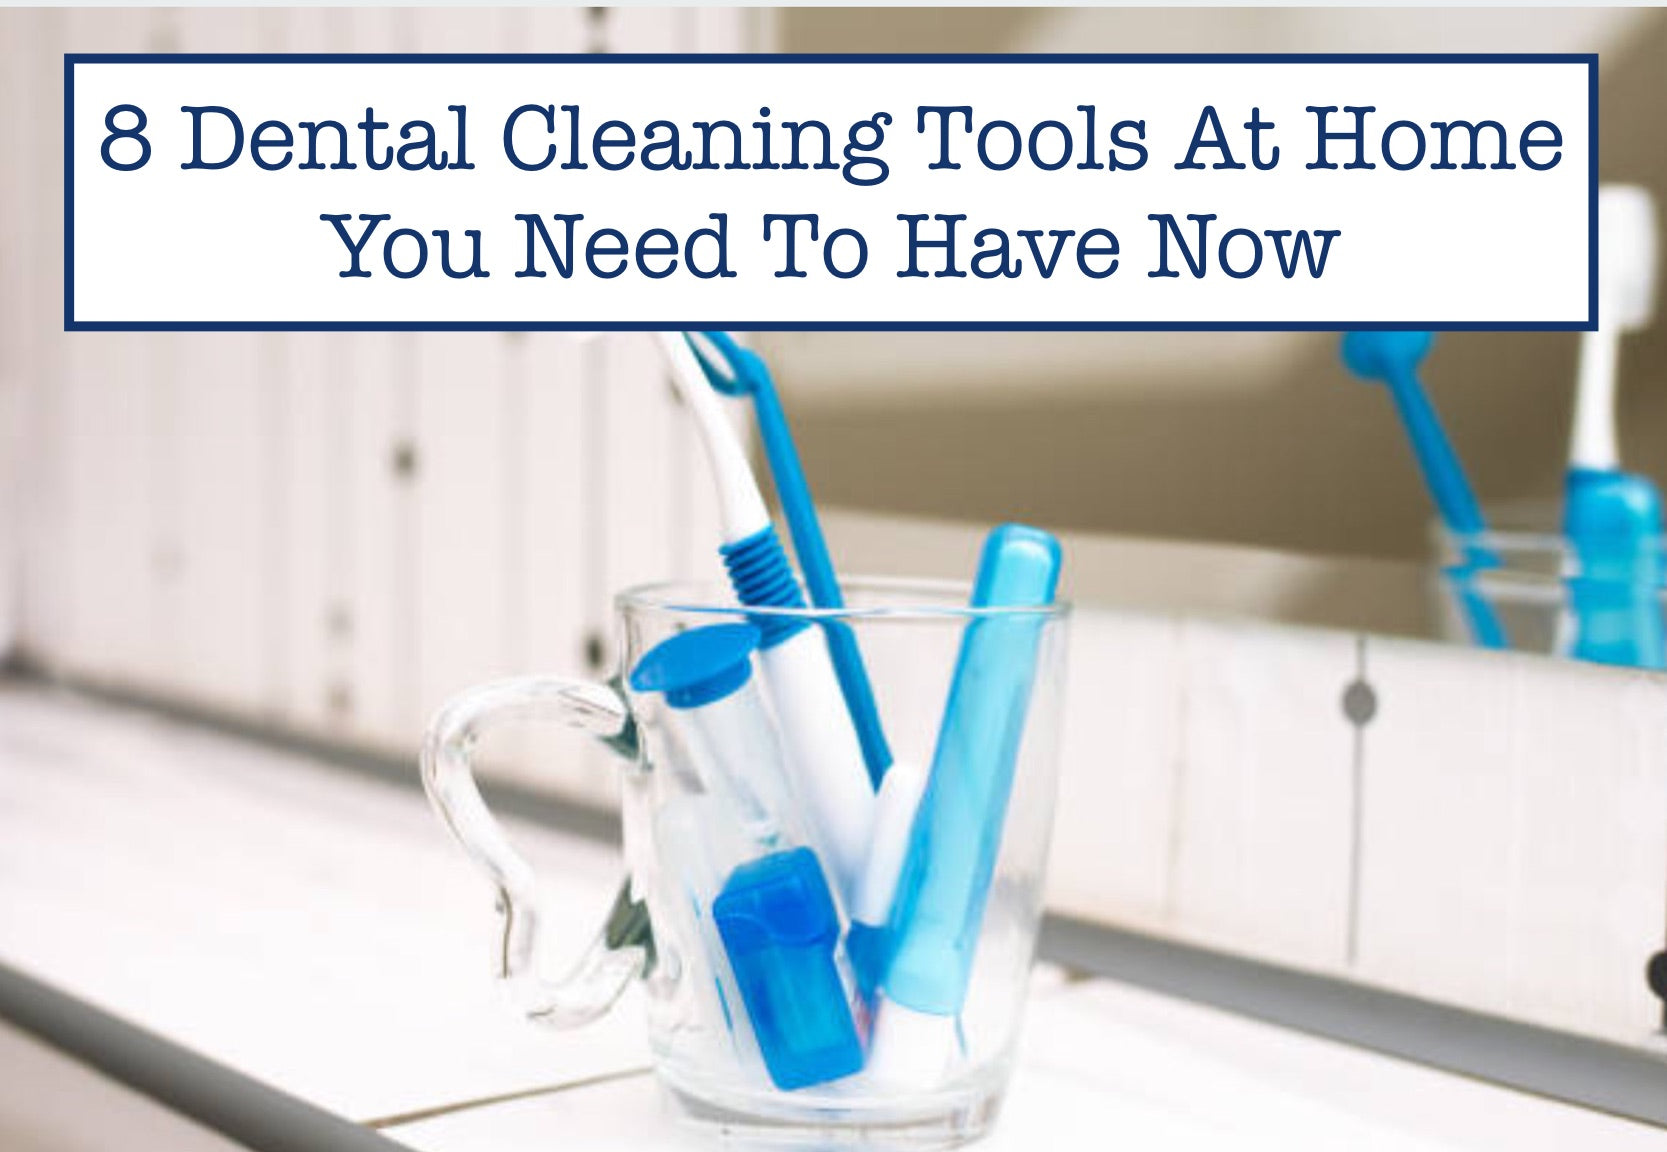 Deep Cleaning Vs Top Up Clean: 5 Key Differences - Power Hygiene